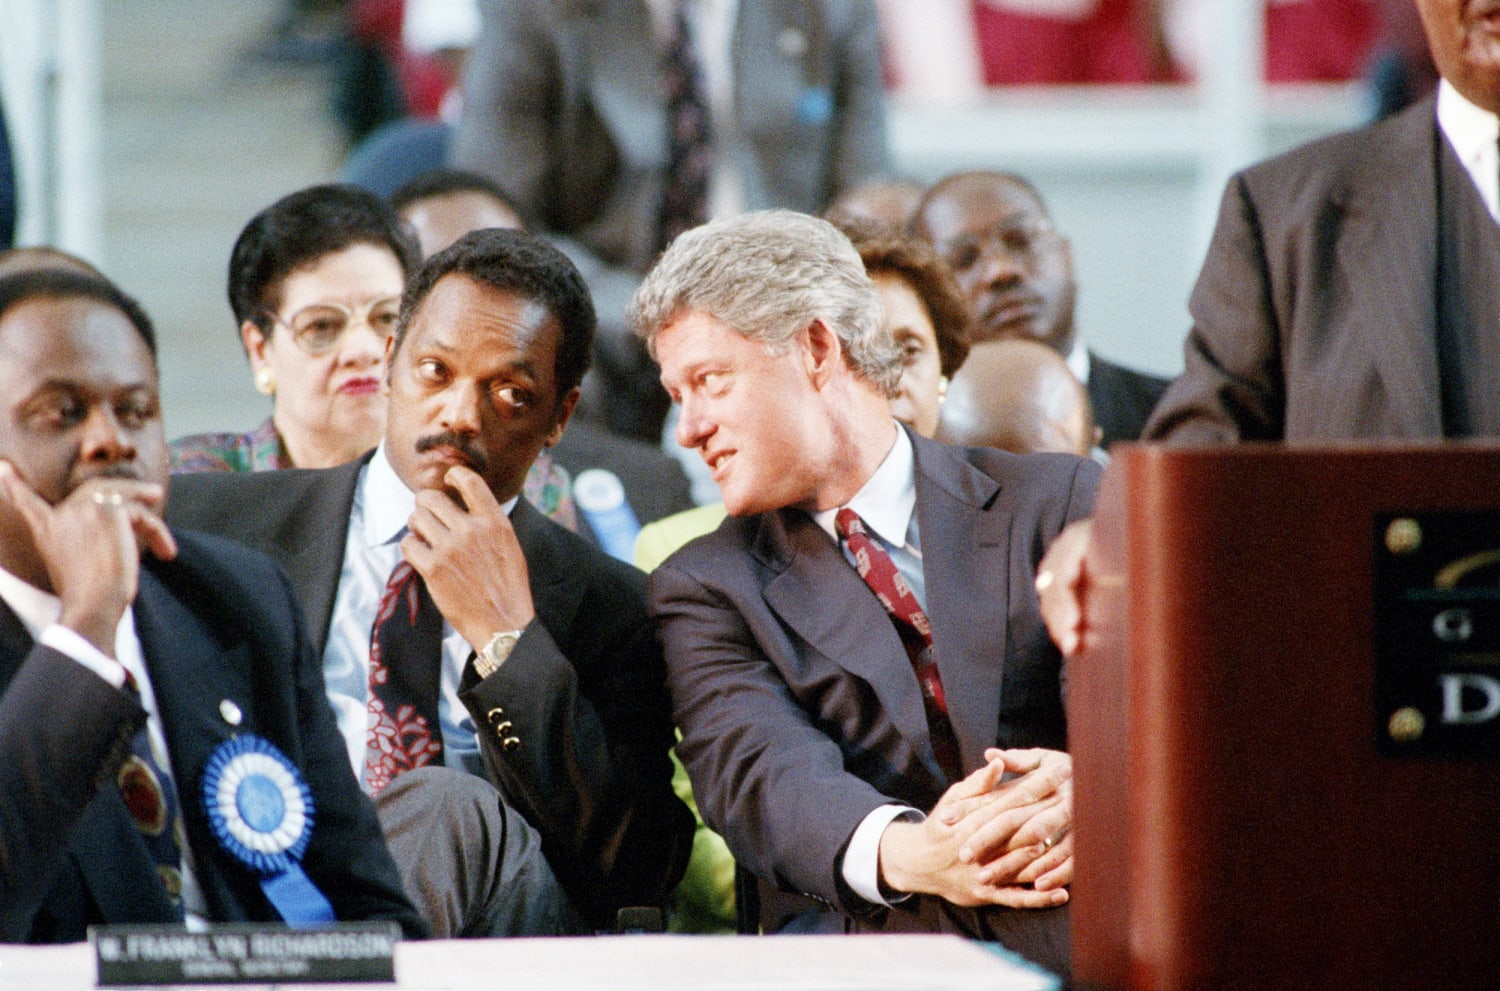 1992: Bill Clinton builds a winning coalition, Jackson is diminished